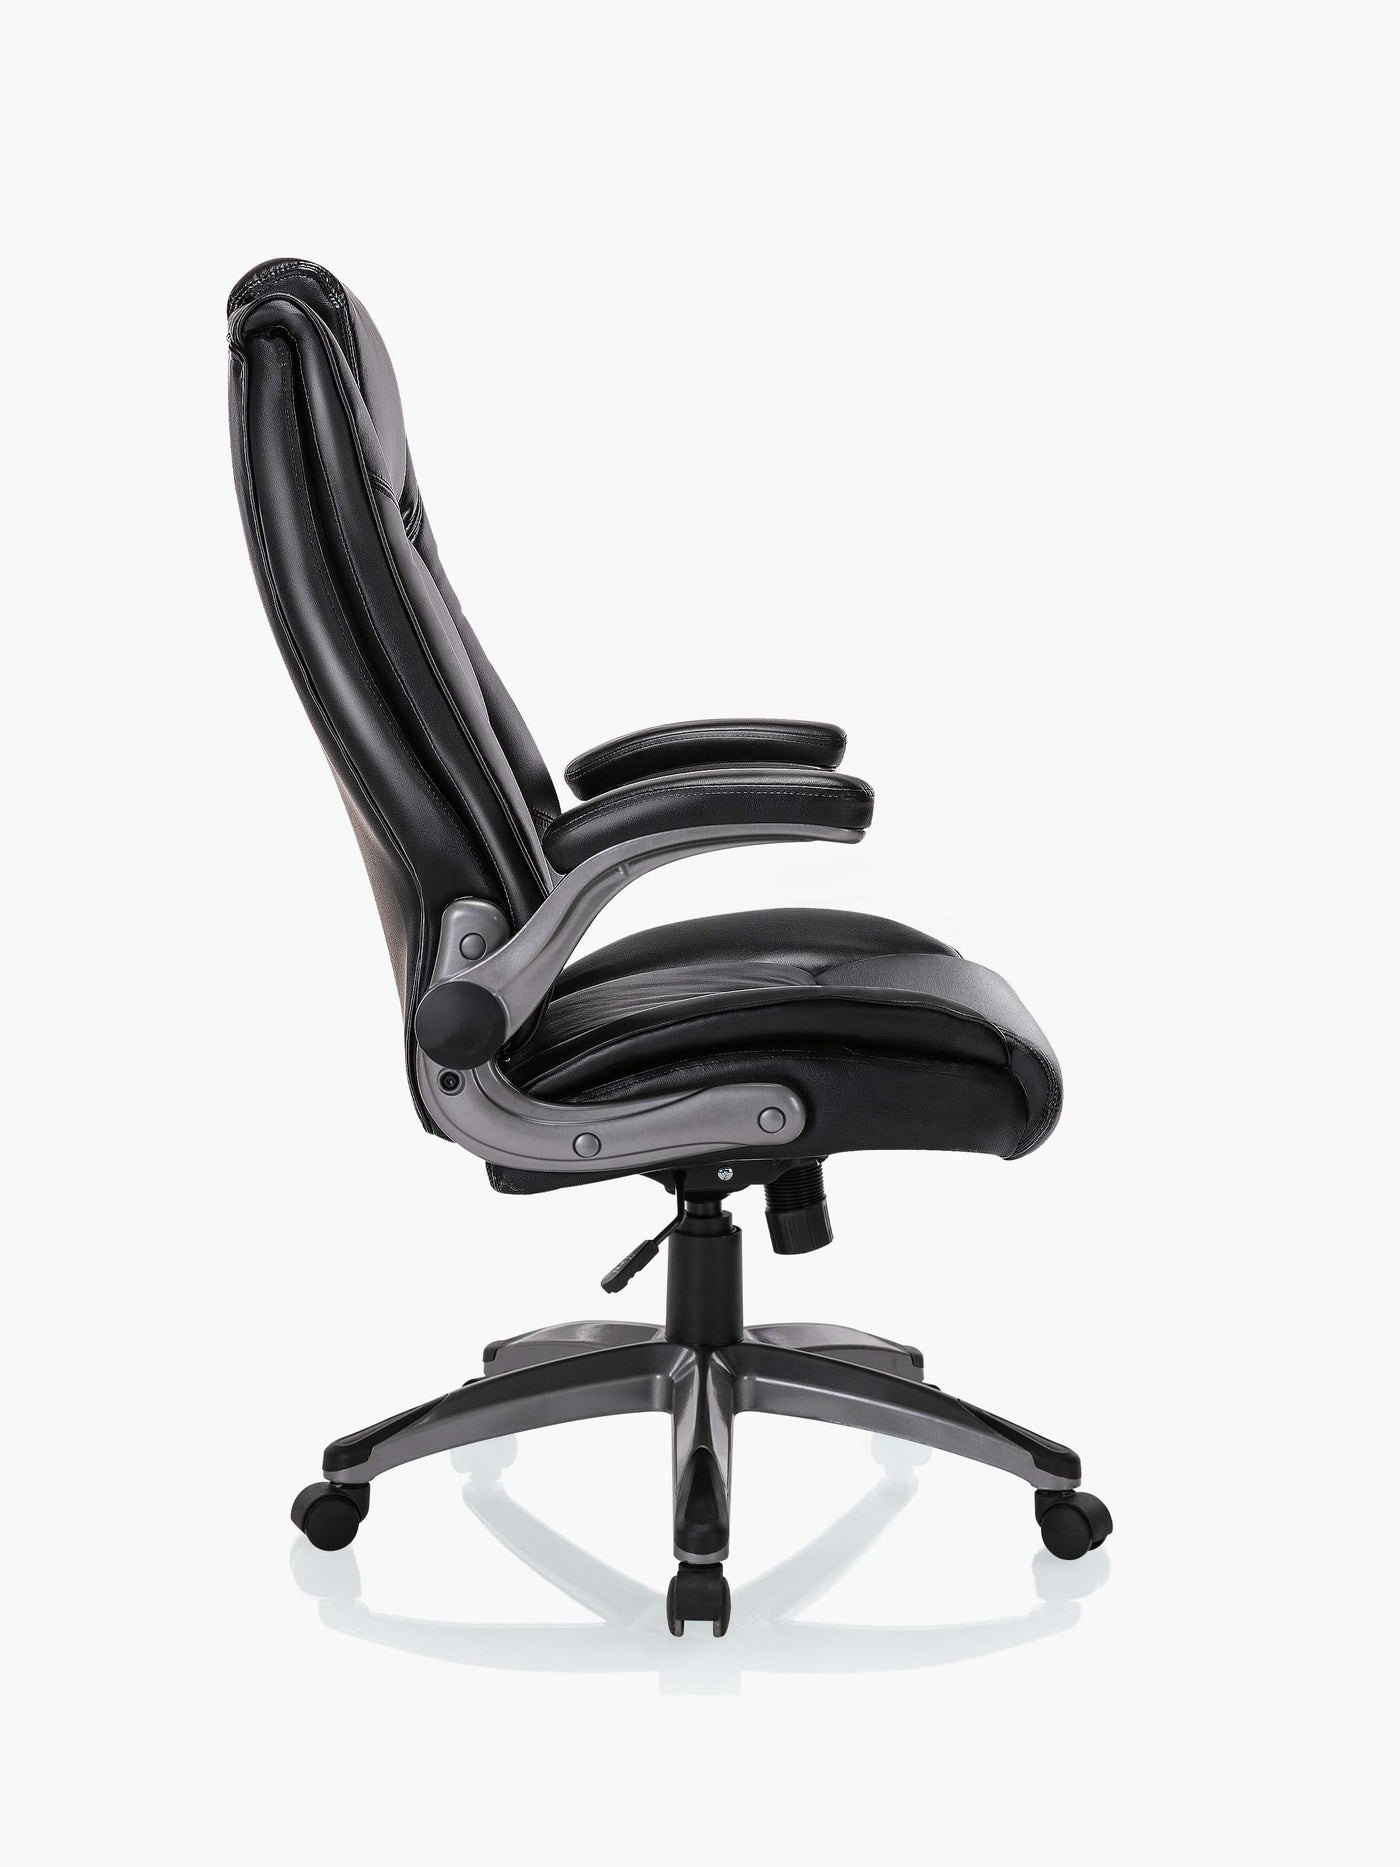 COLAMY Ergonomic High Back Leather Office Chair 2199 #color_black